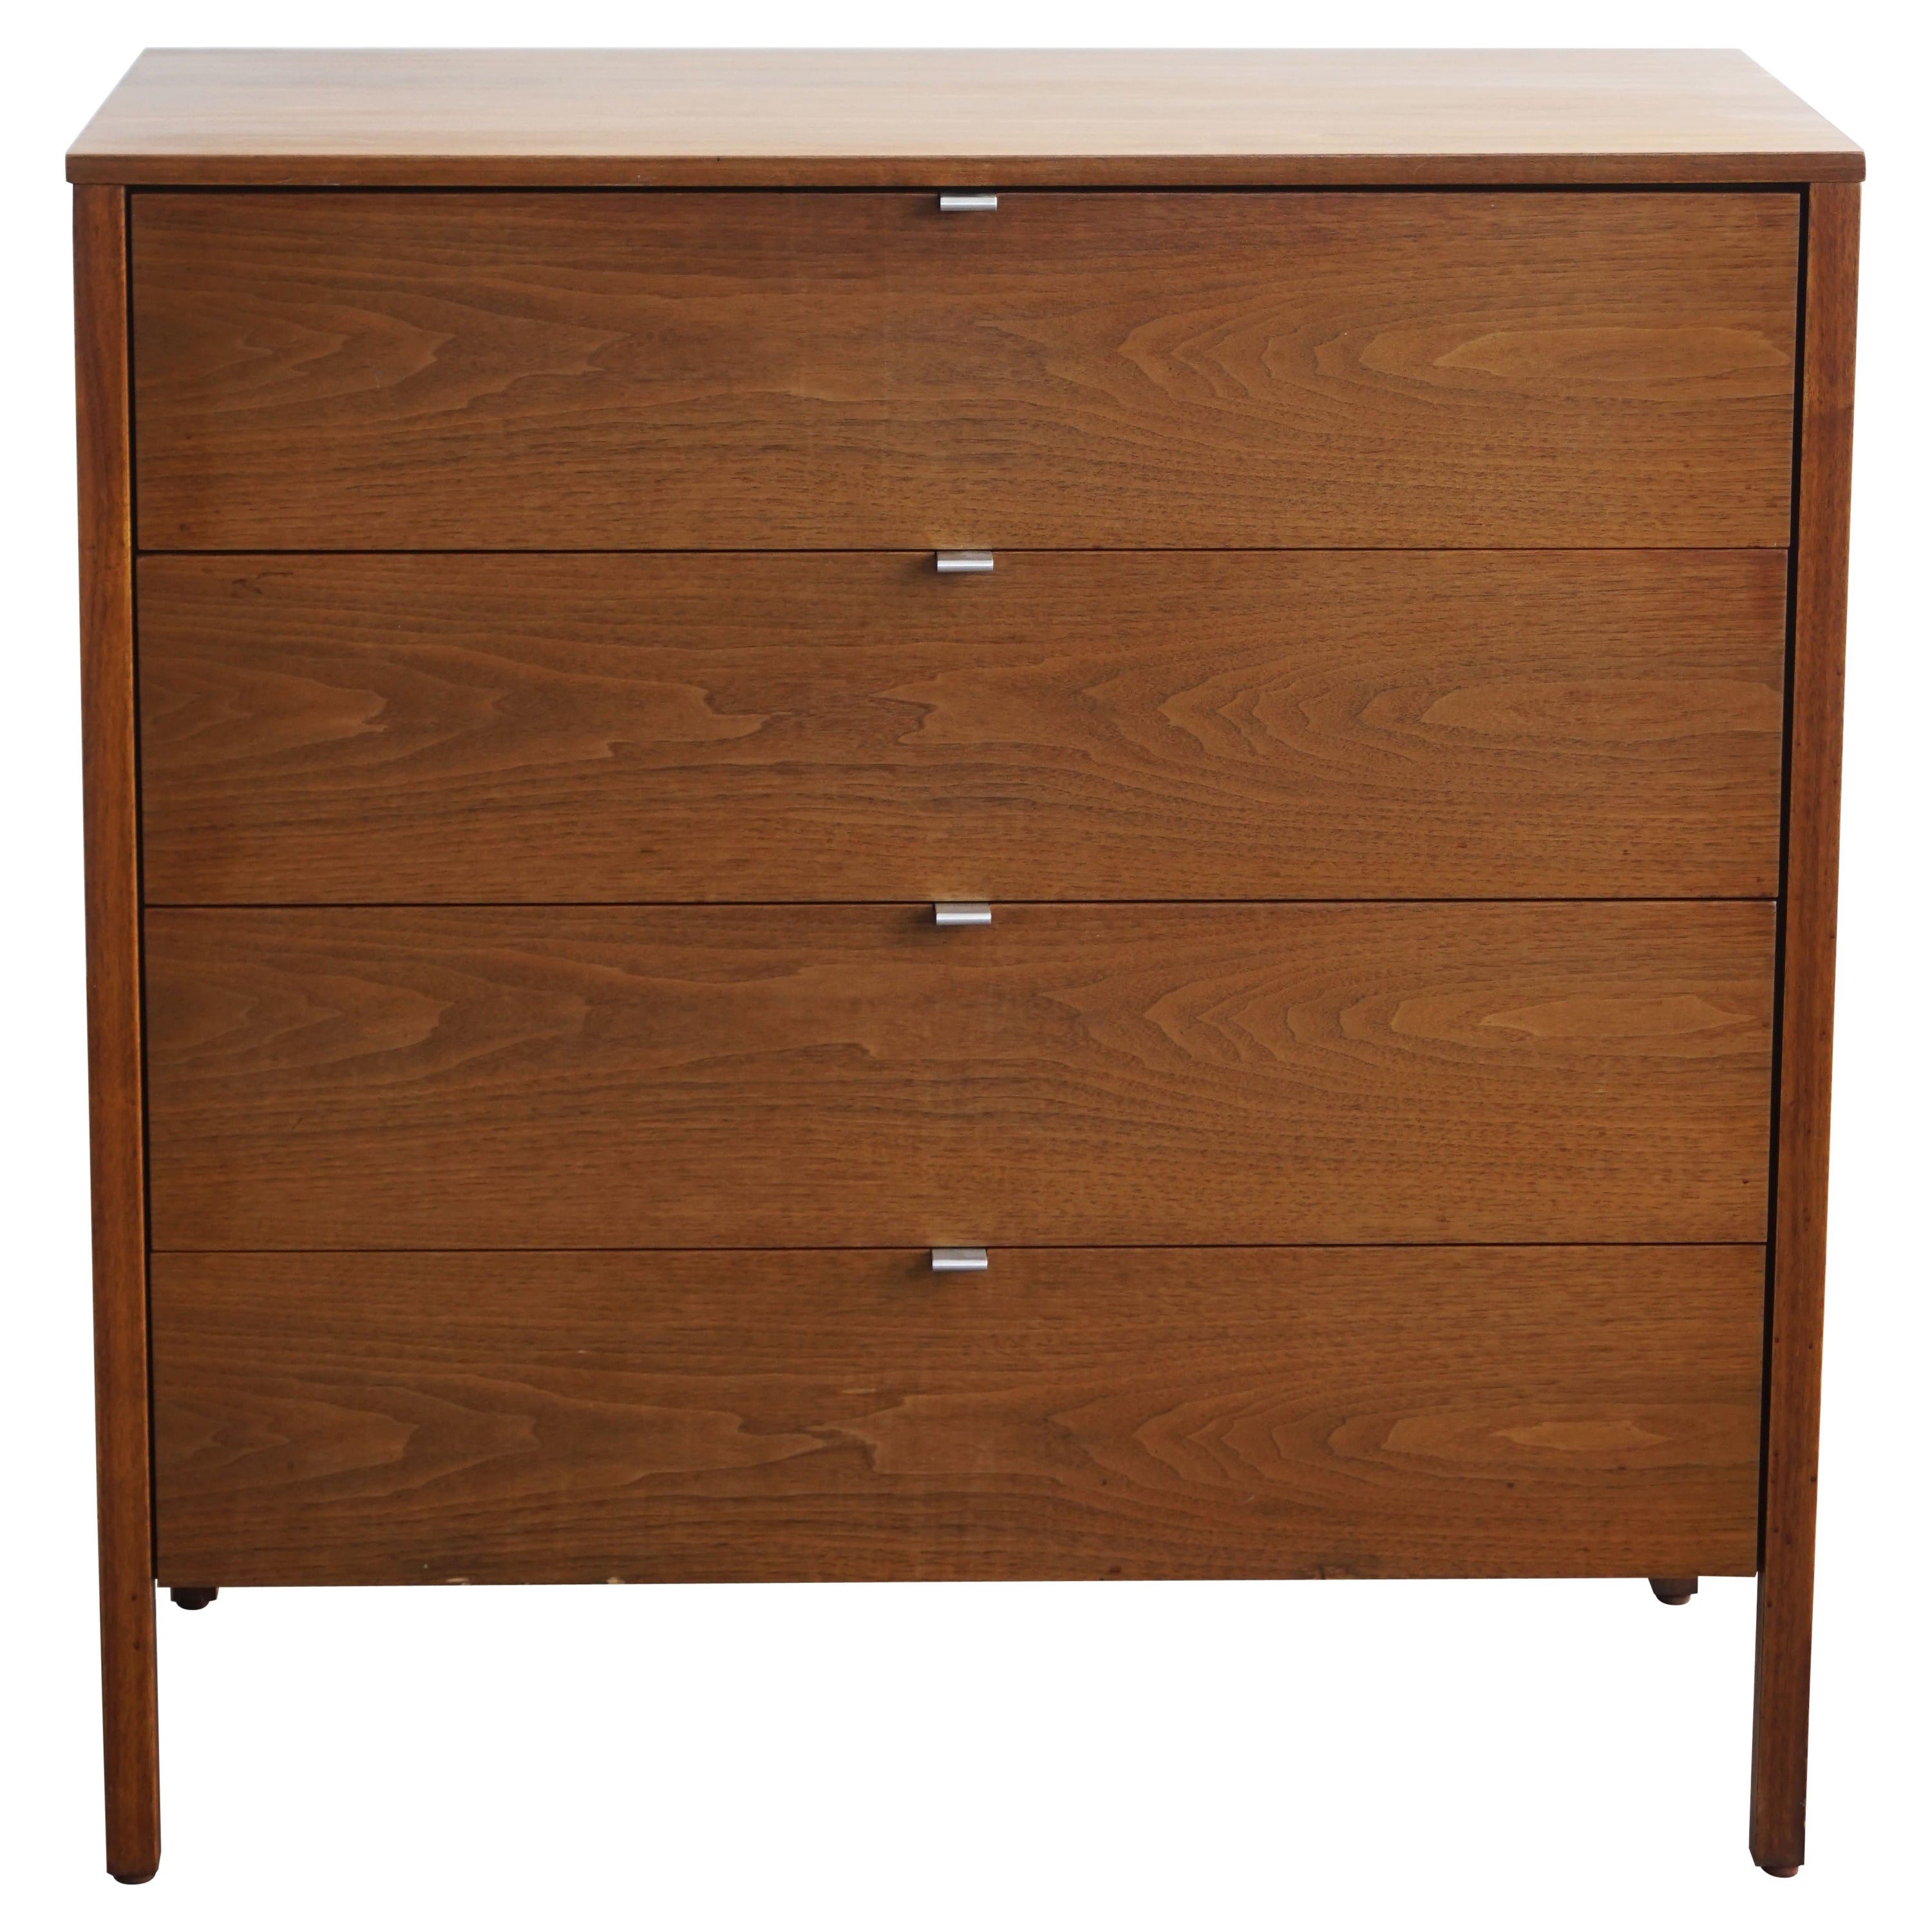 Early Florence Knoll Chest of Drawers Dresser in Walnut